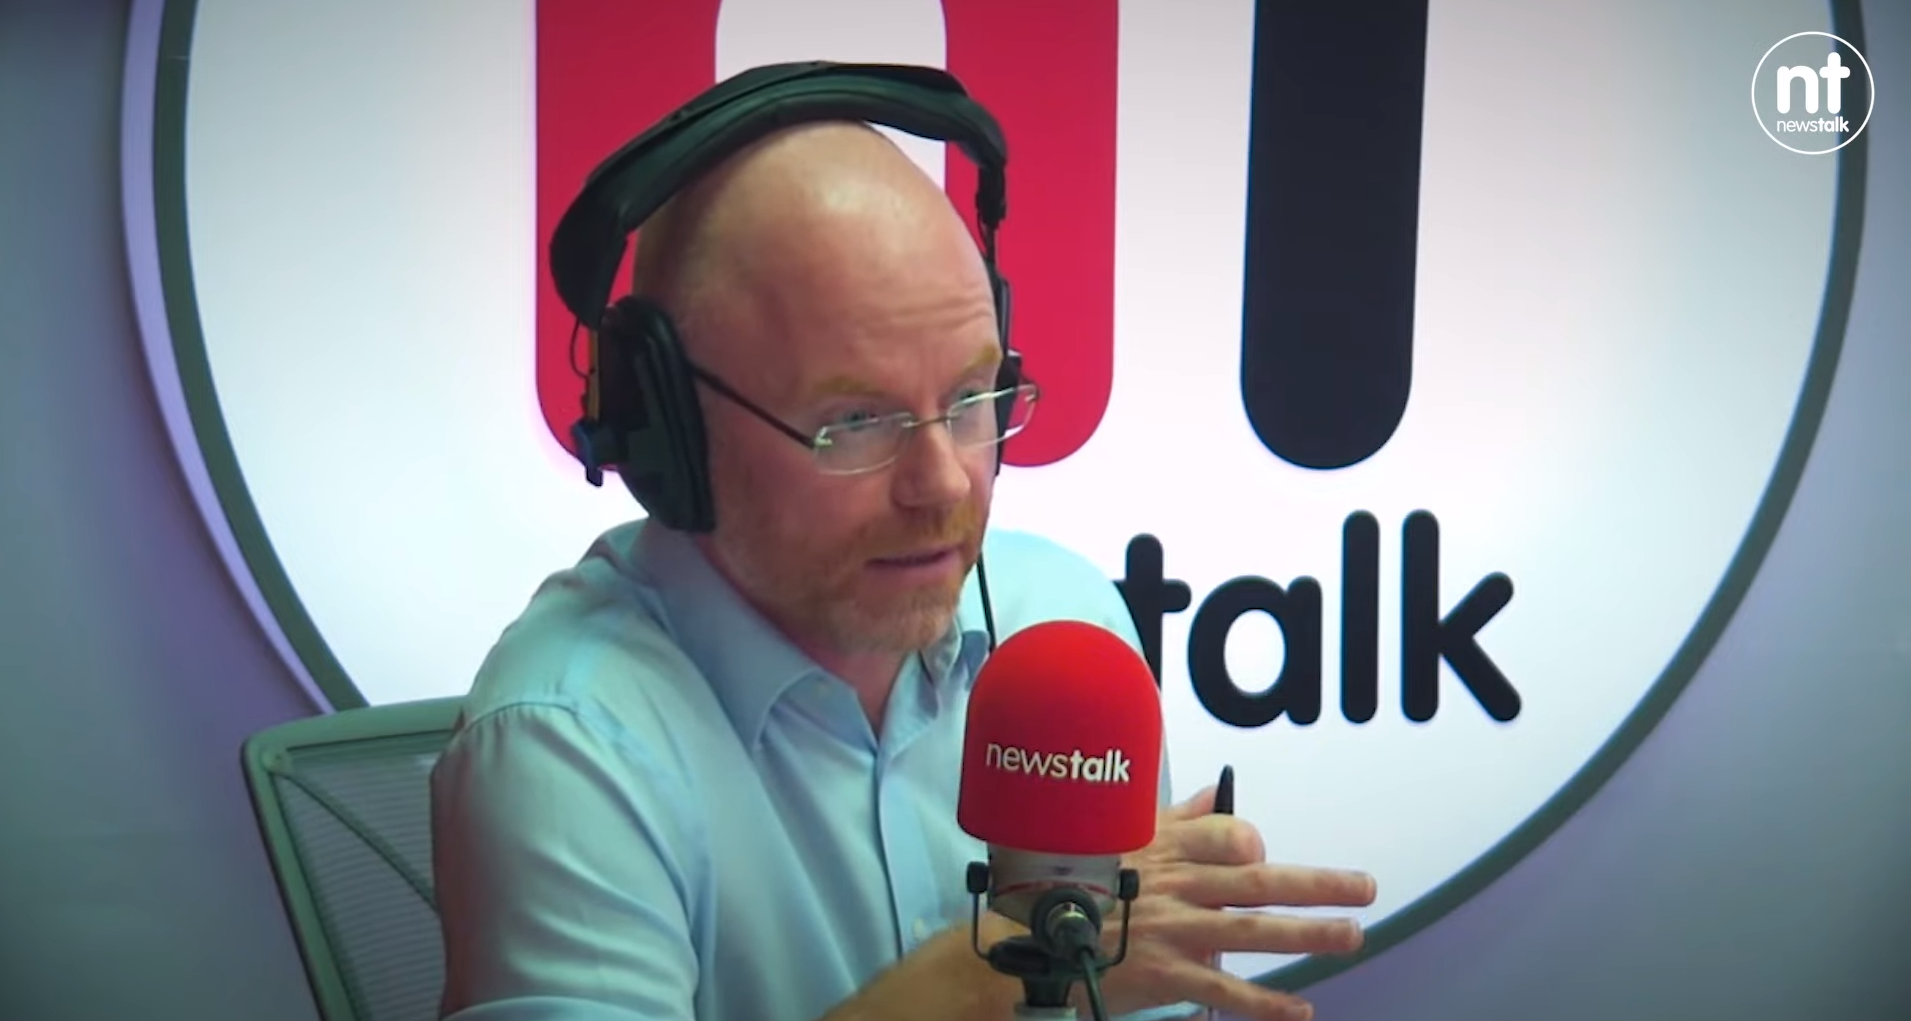 The Health Minister Stephen Donnelly in the Newstalk studio